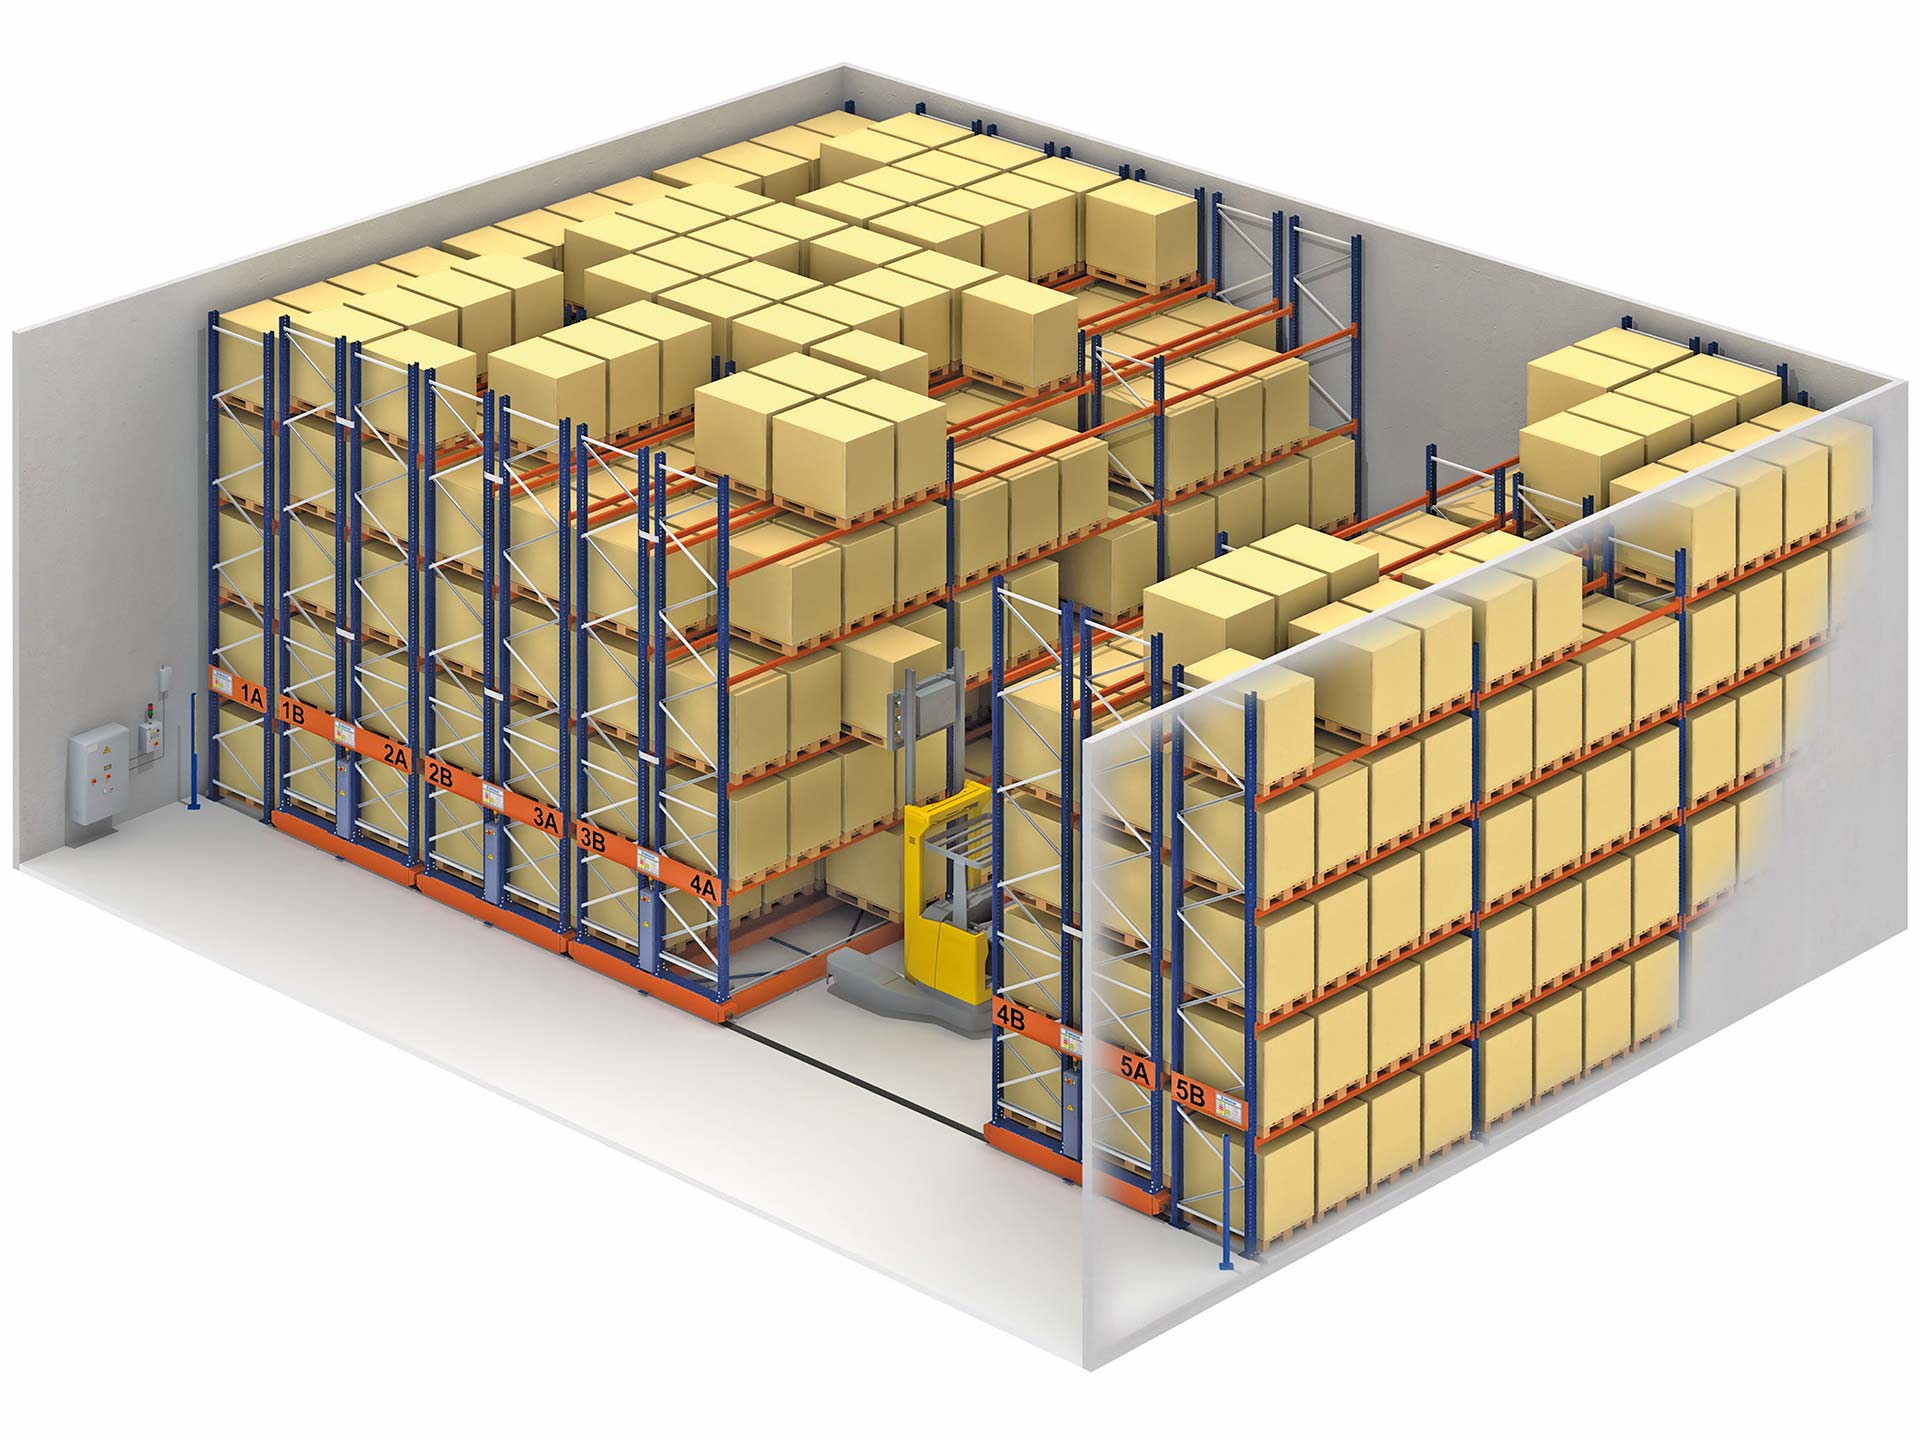 The Movirack system allows operators to manoeuvre forklift trucks to access the product when needed